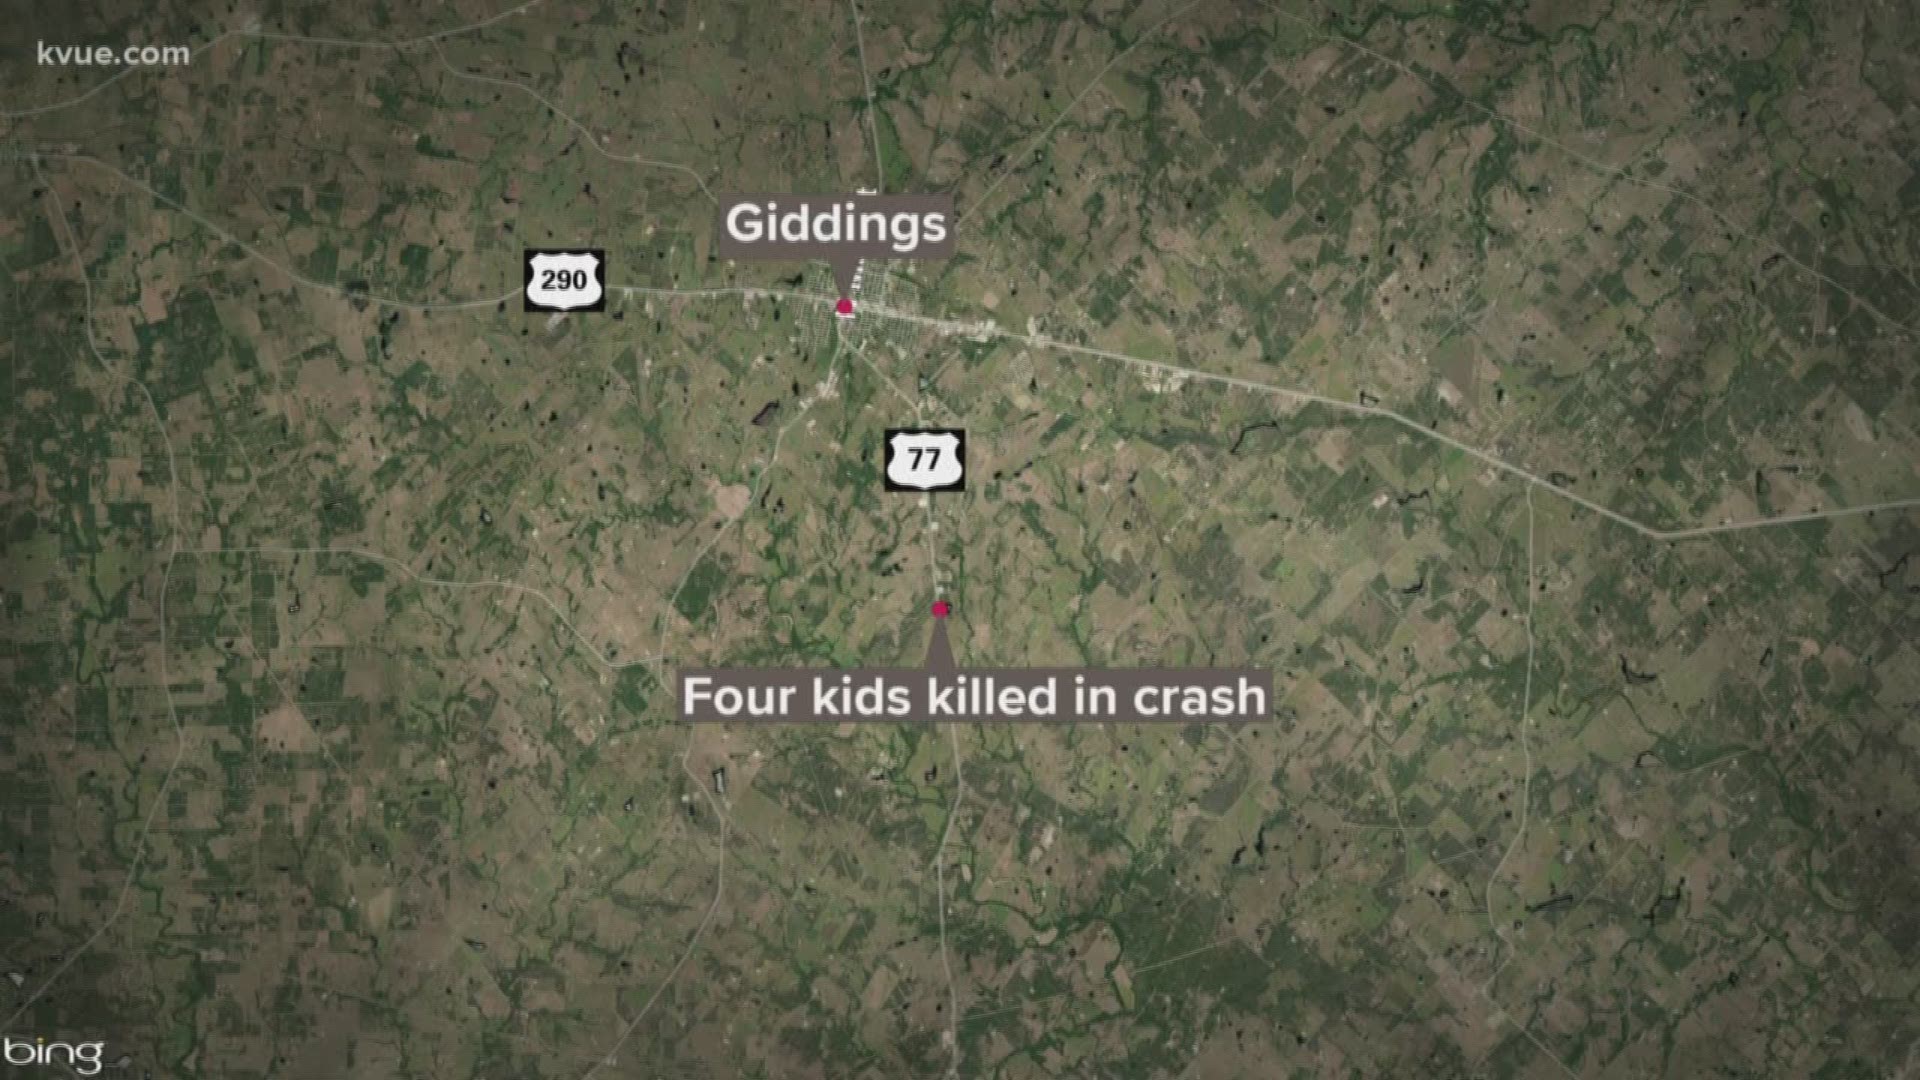 A crash with a semi on U.S. 77 led to the deaths of four children.